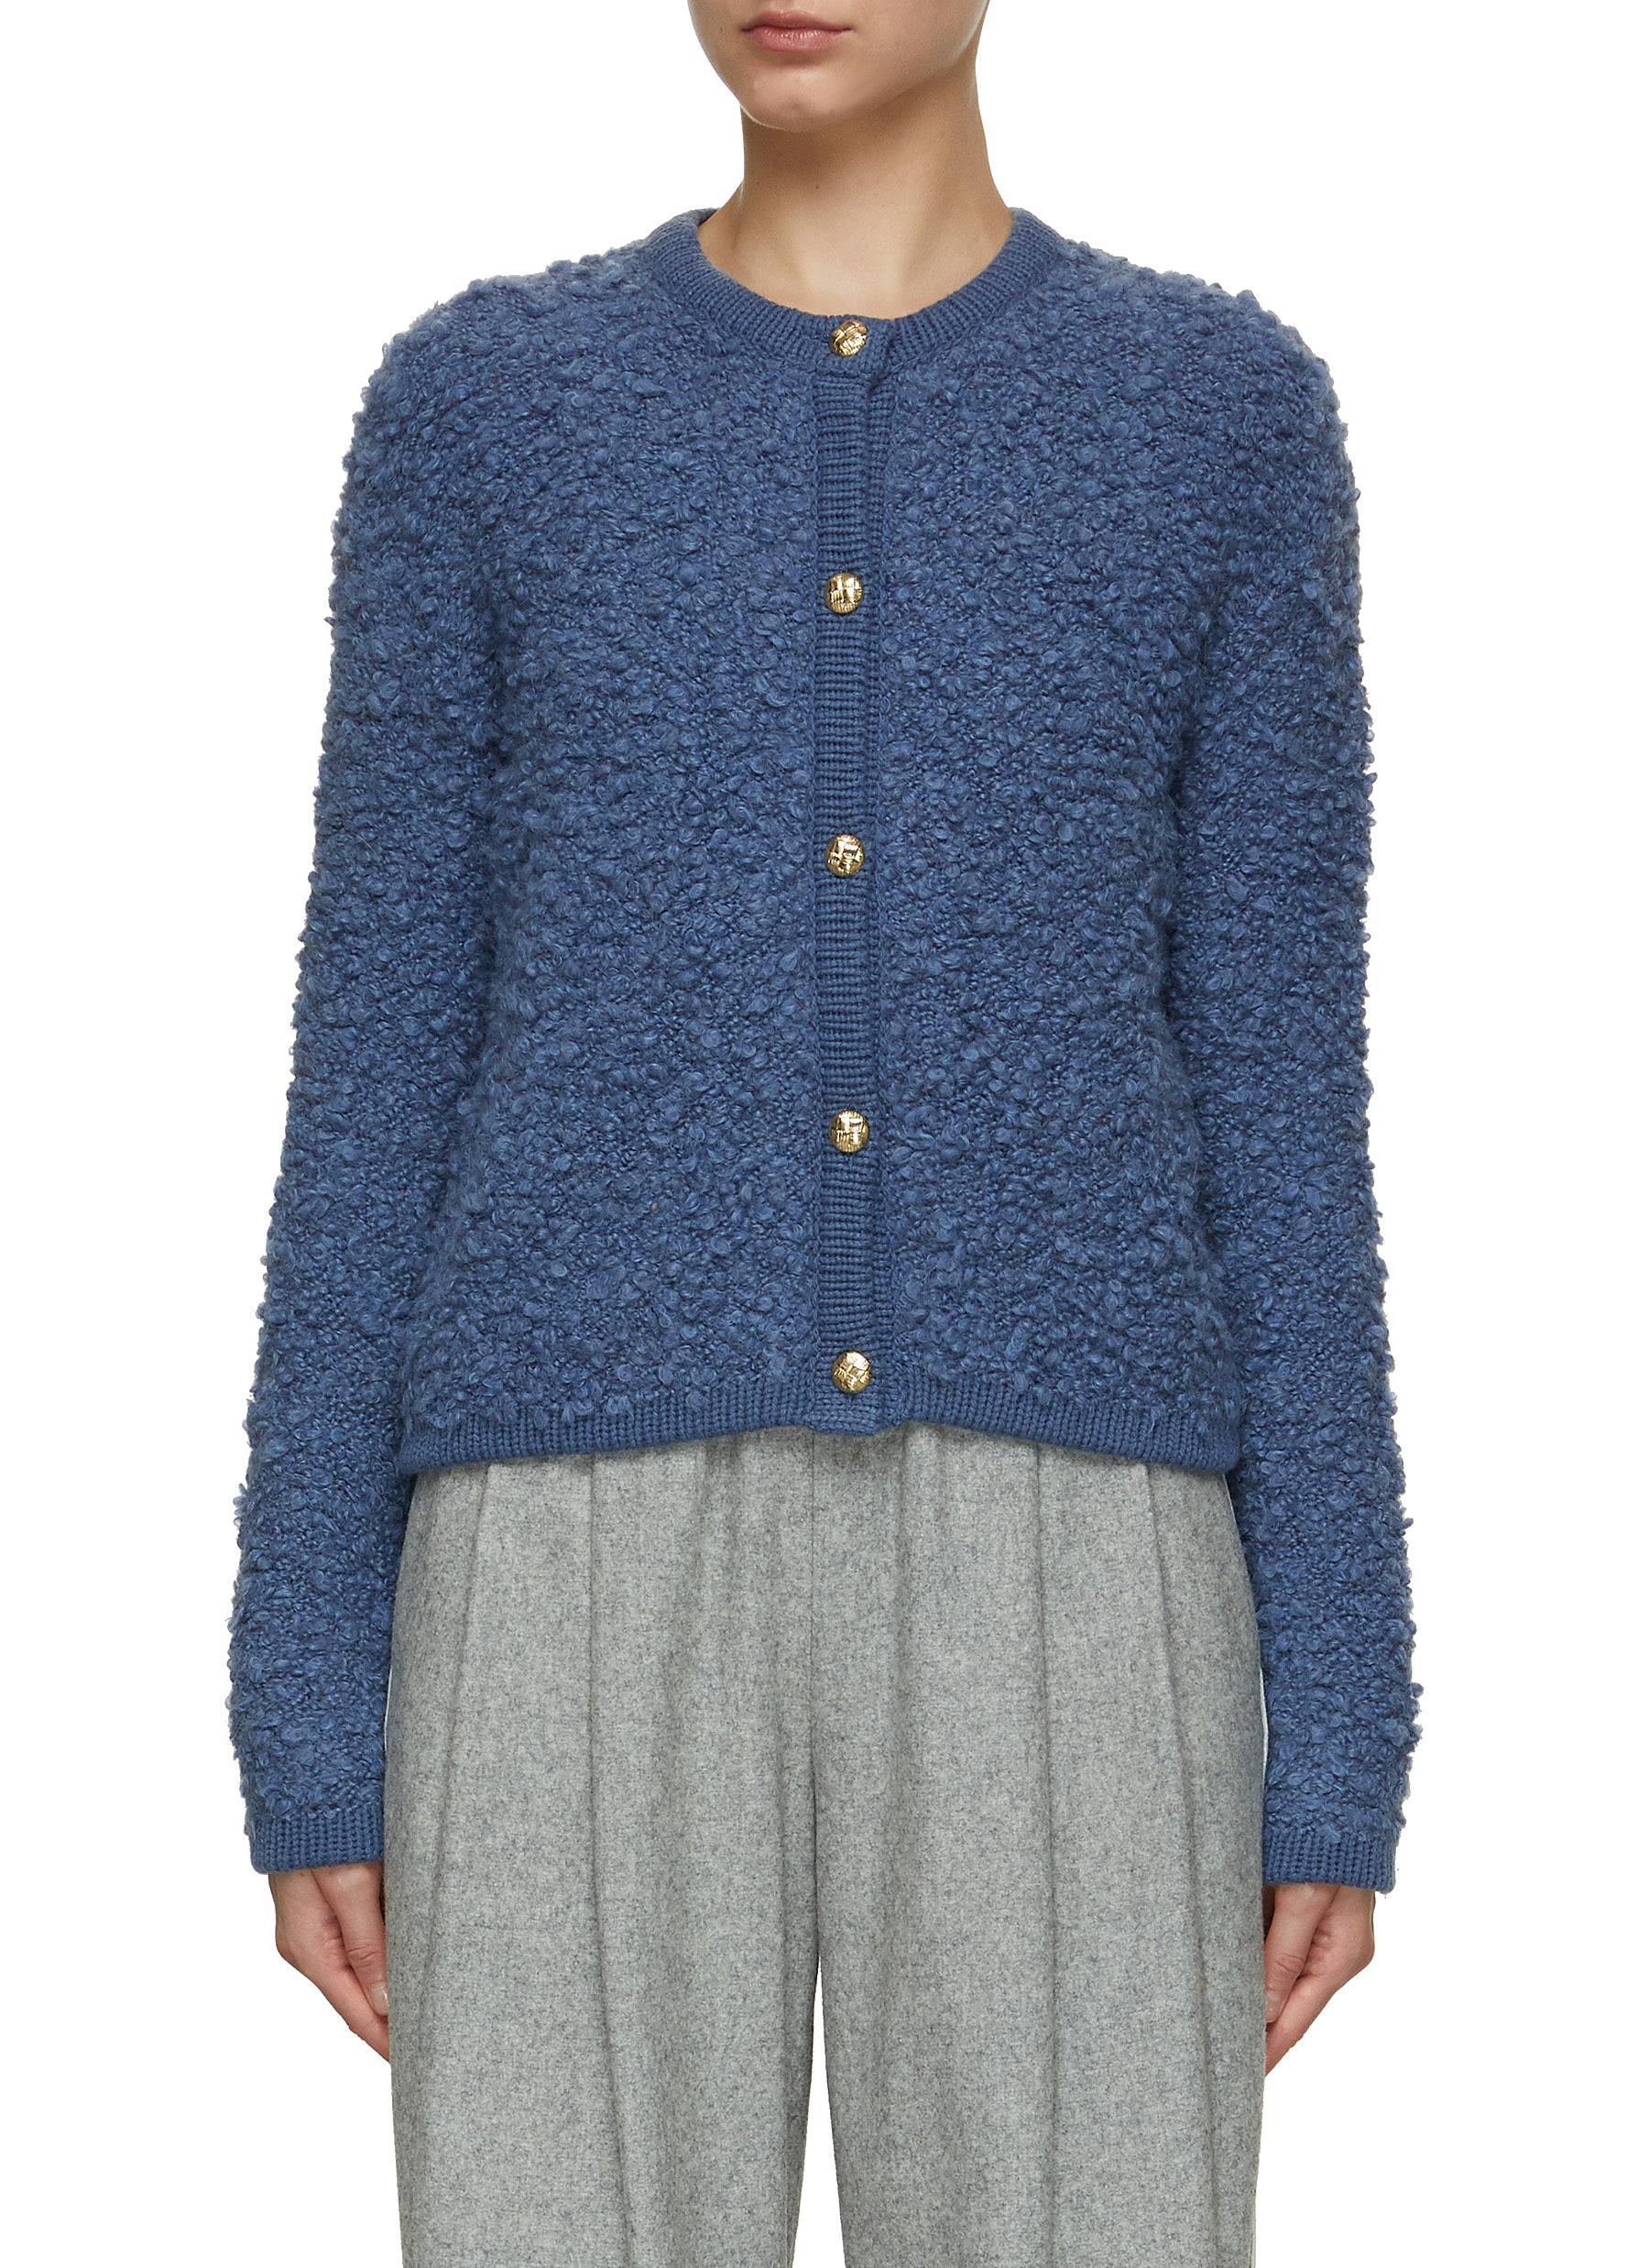 Bruno Manetti Boucle Knit Cardigan in Blue | Lyst